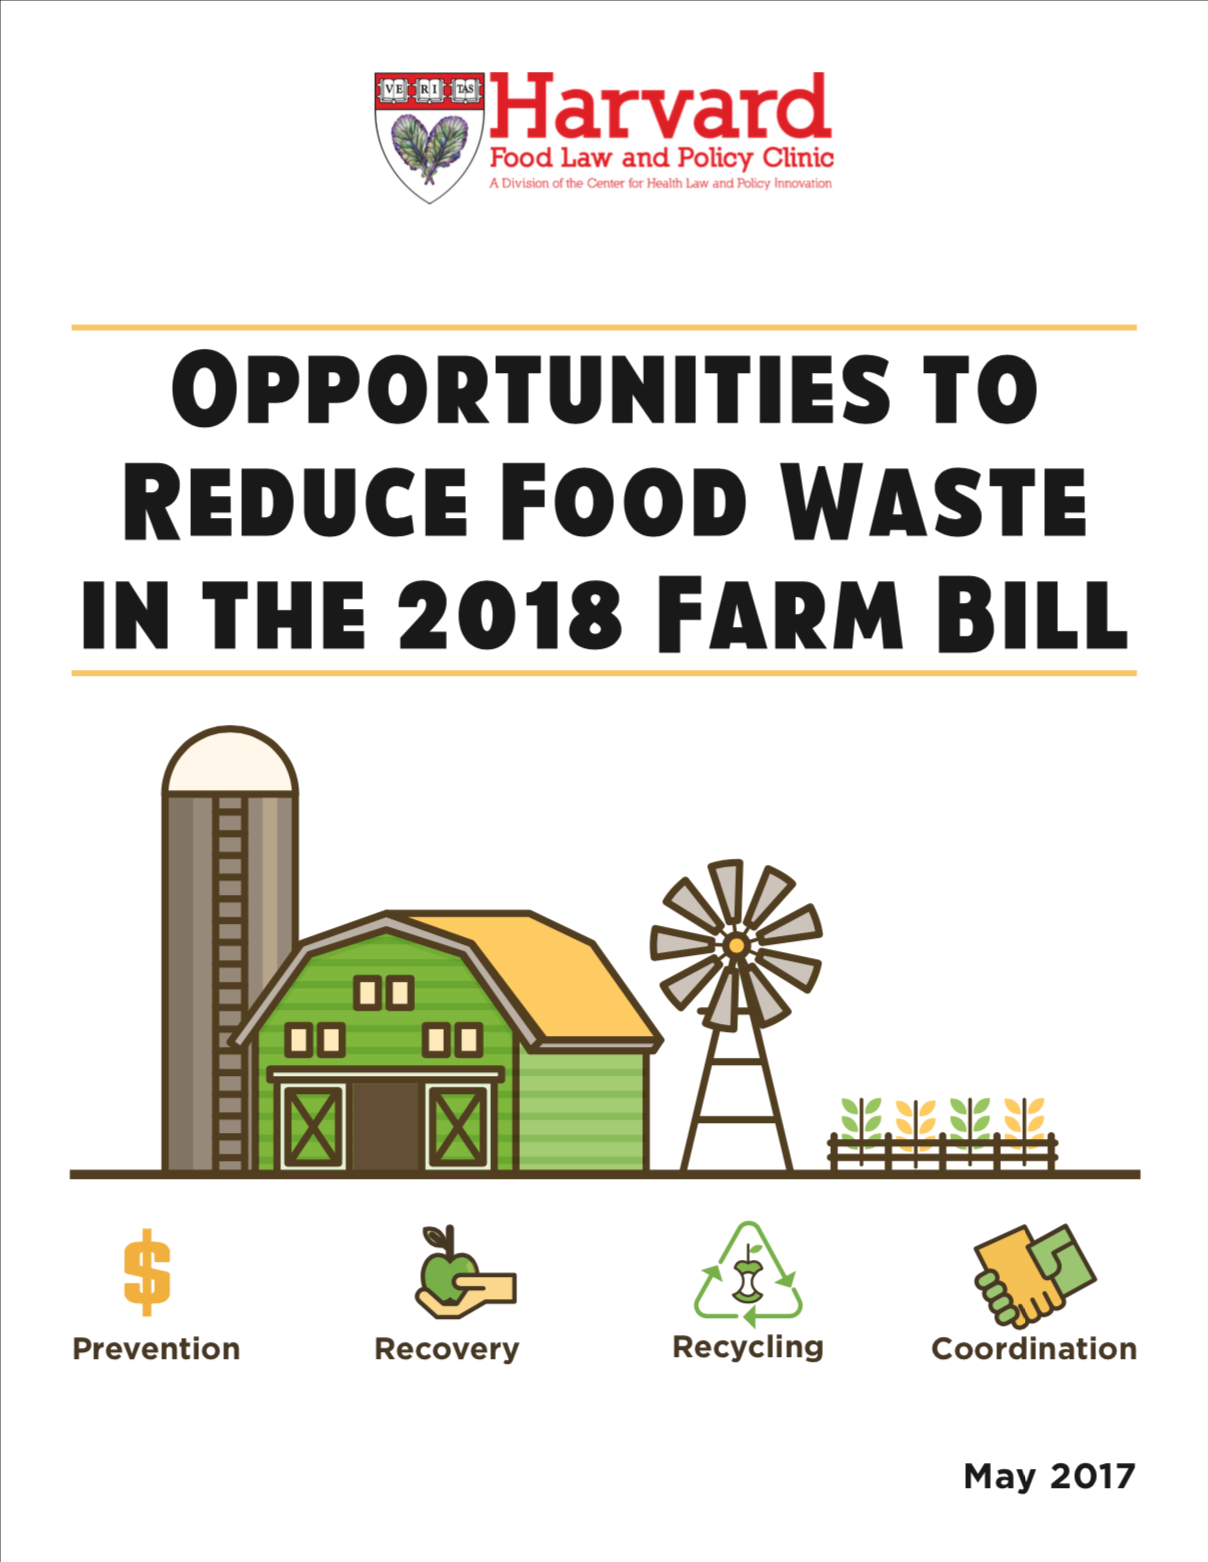 Opportunities to Reduce Food Waste in the 2018 Farm Bill